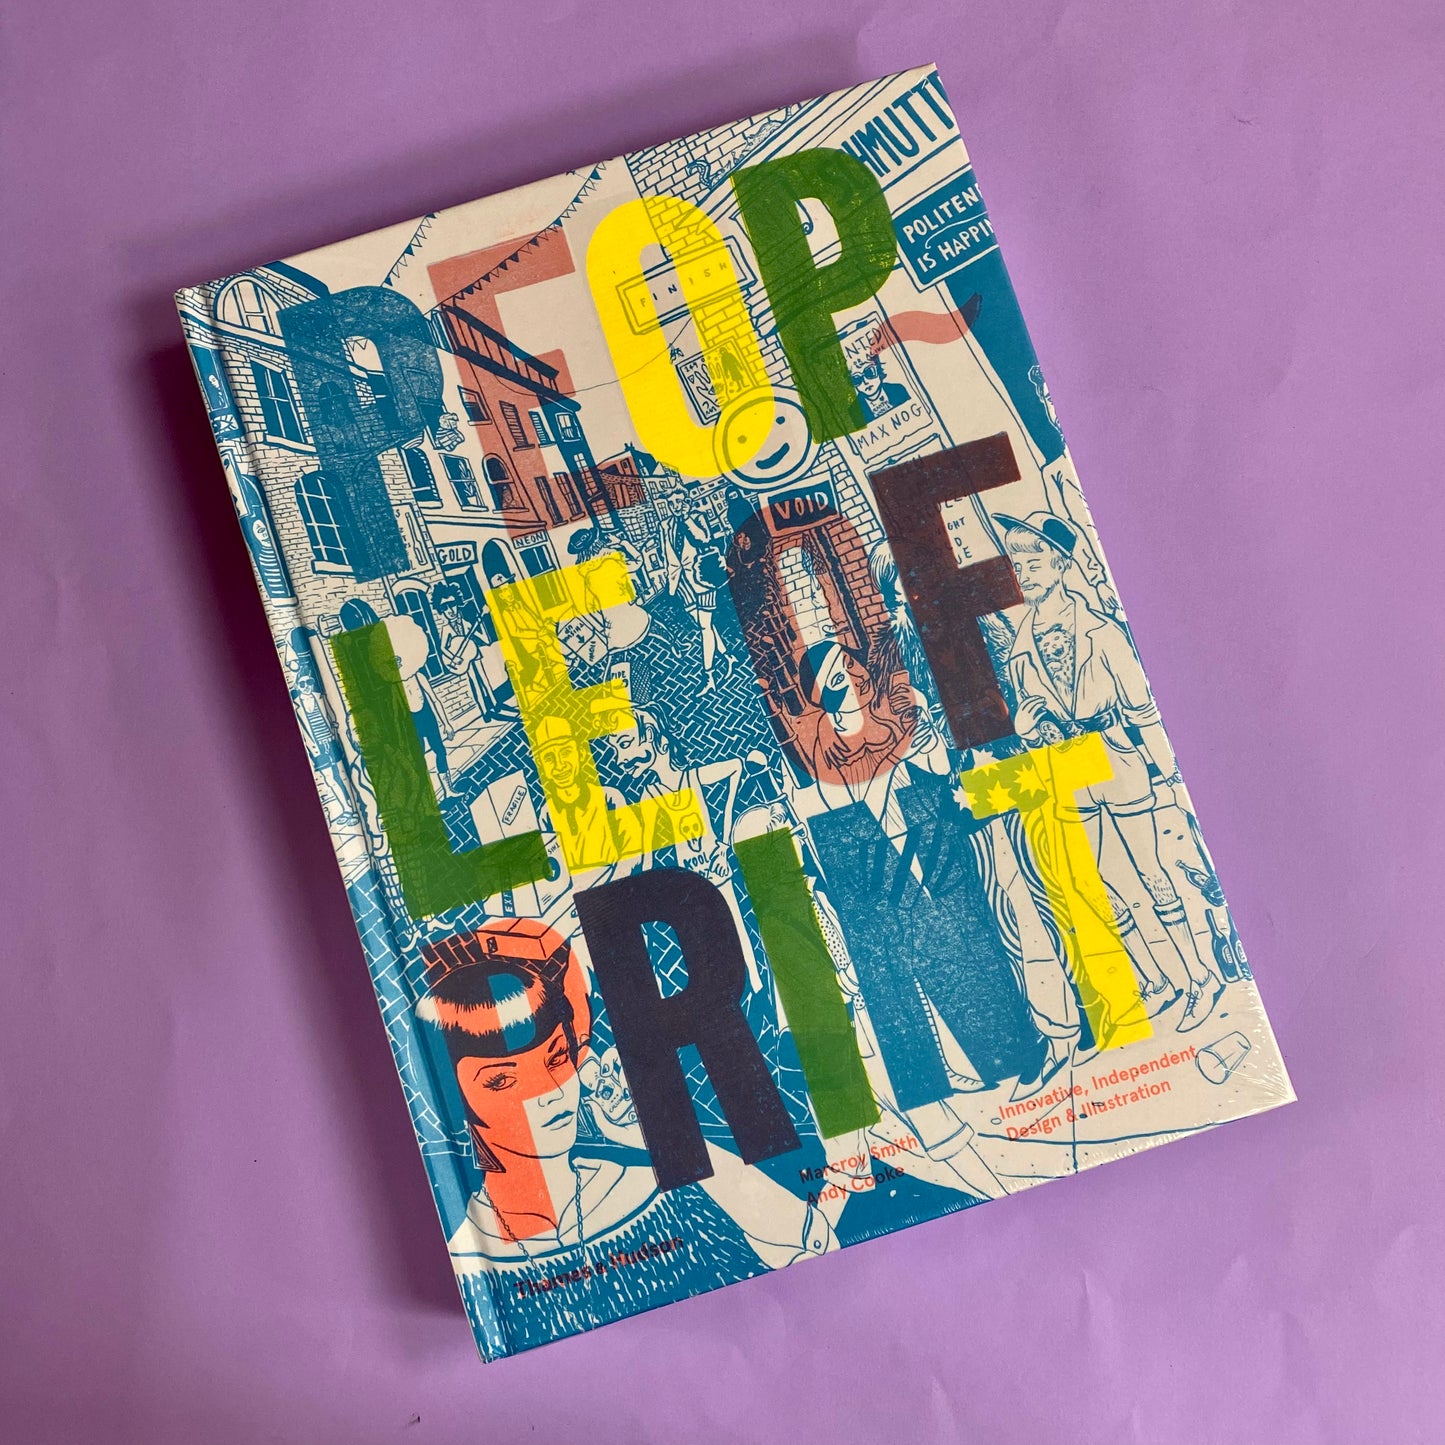 People of Print: Innovative Independent Design and Illustration